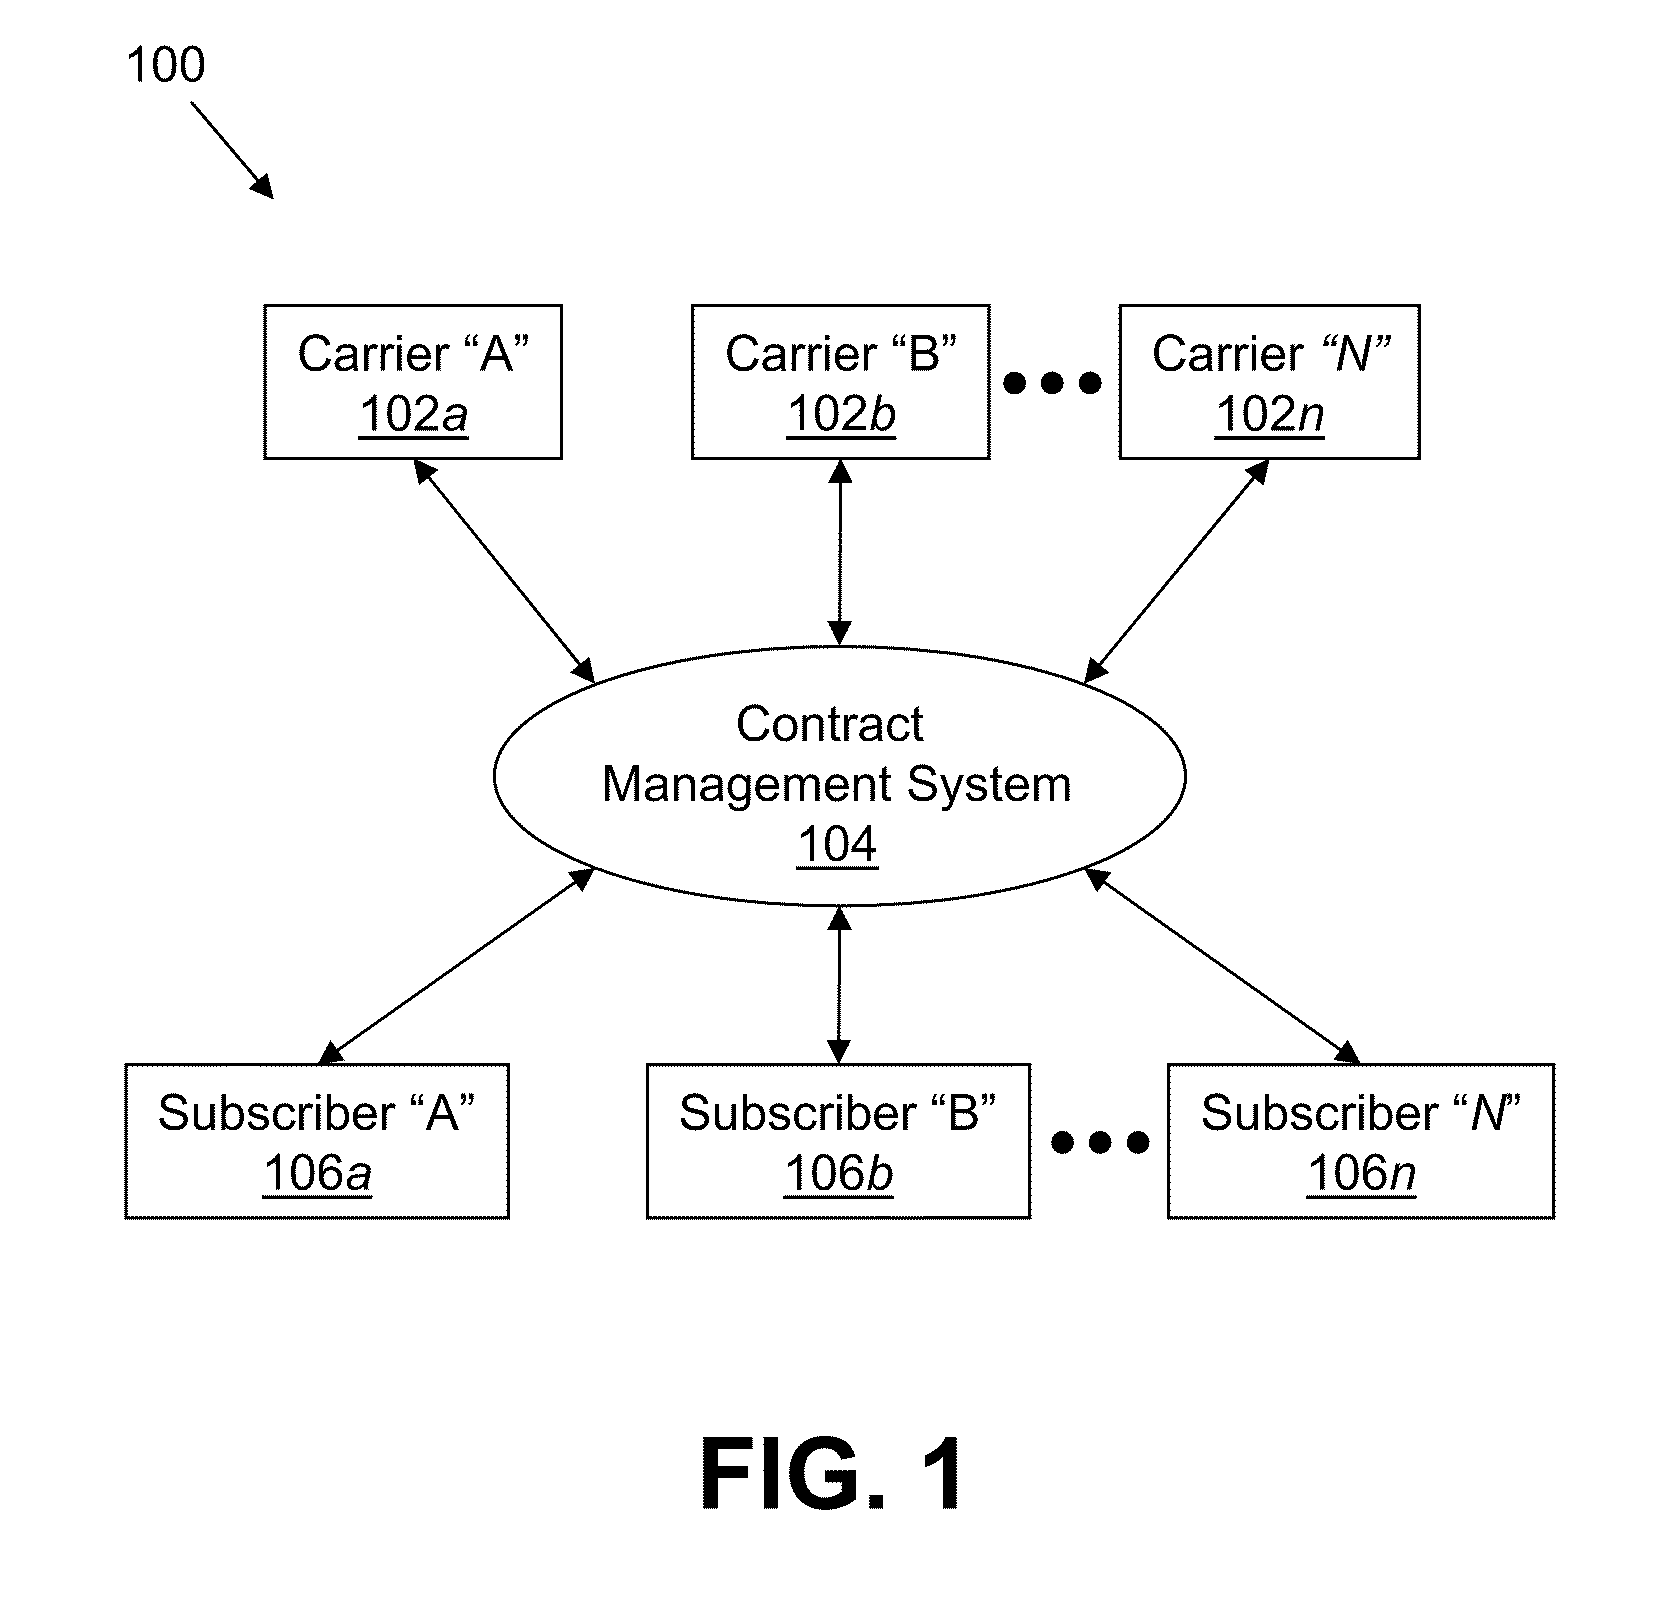 System and Method for Electronically Monitoring, Alerting, and Evaluating Changes in a Health Care Payor Policy